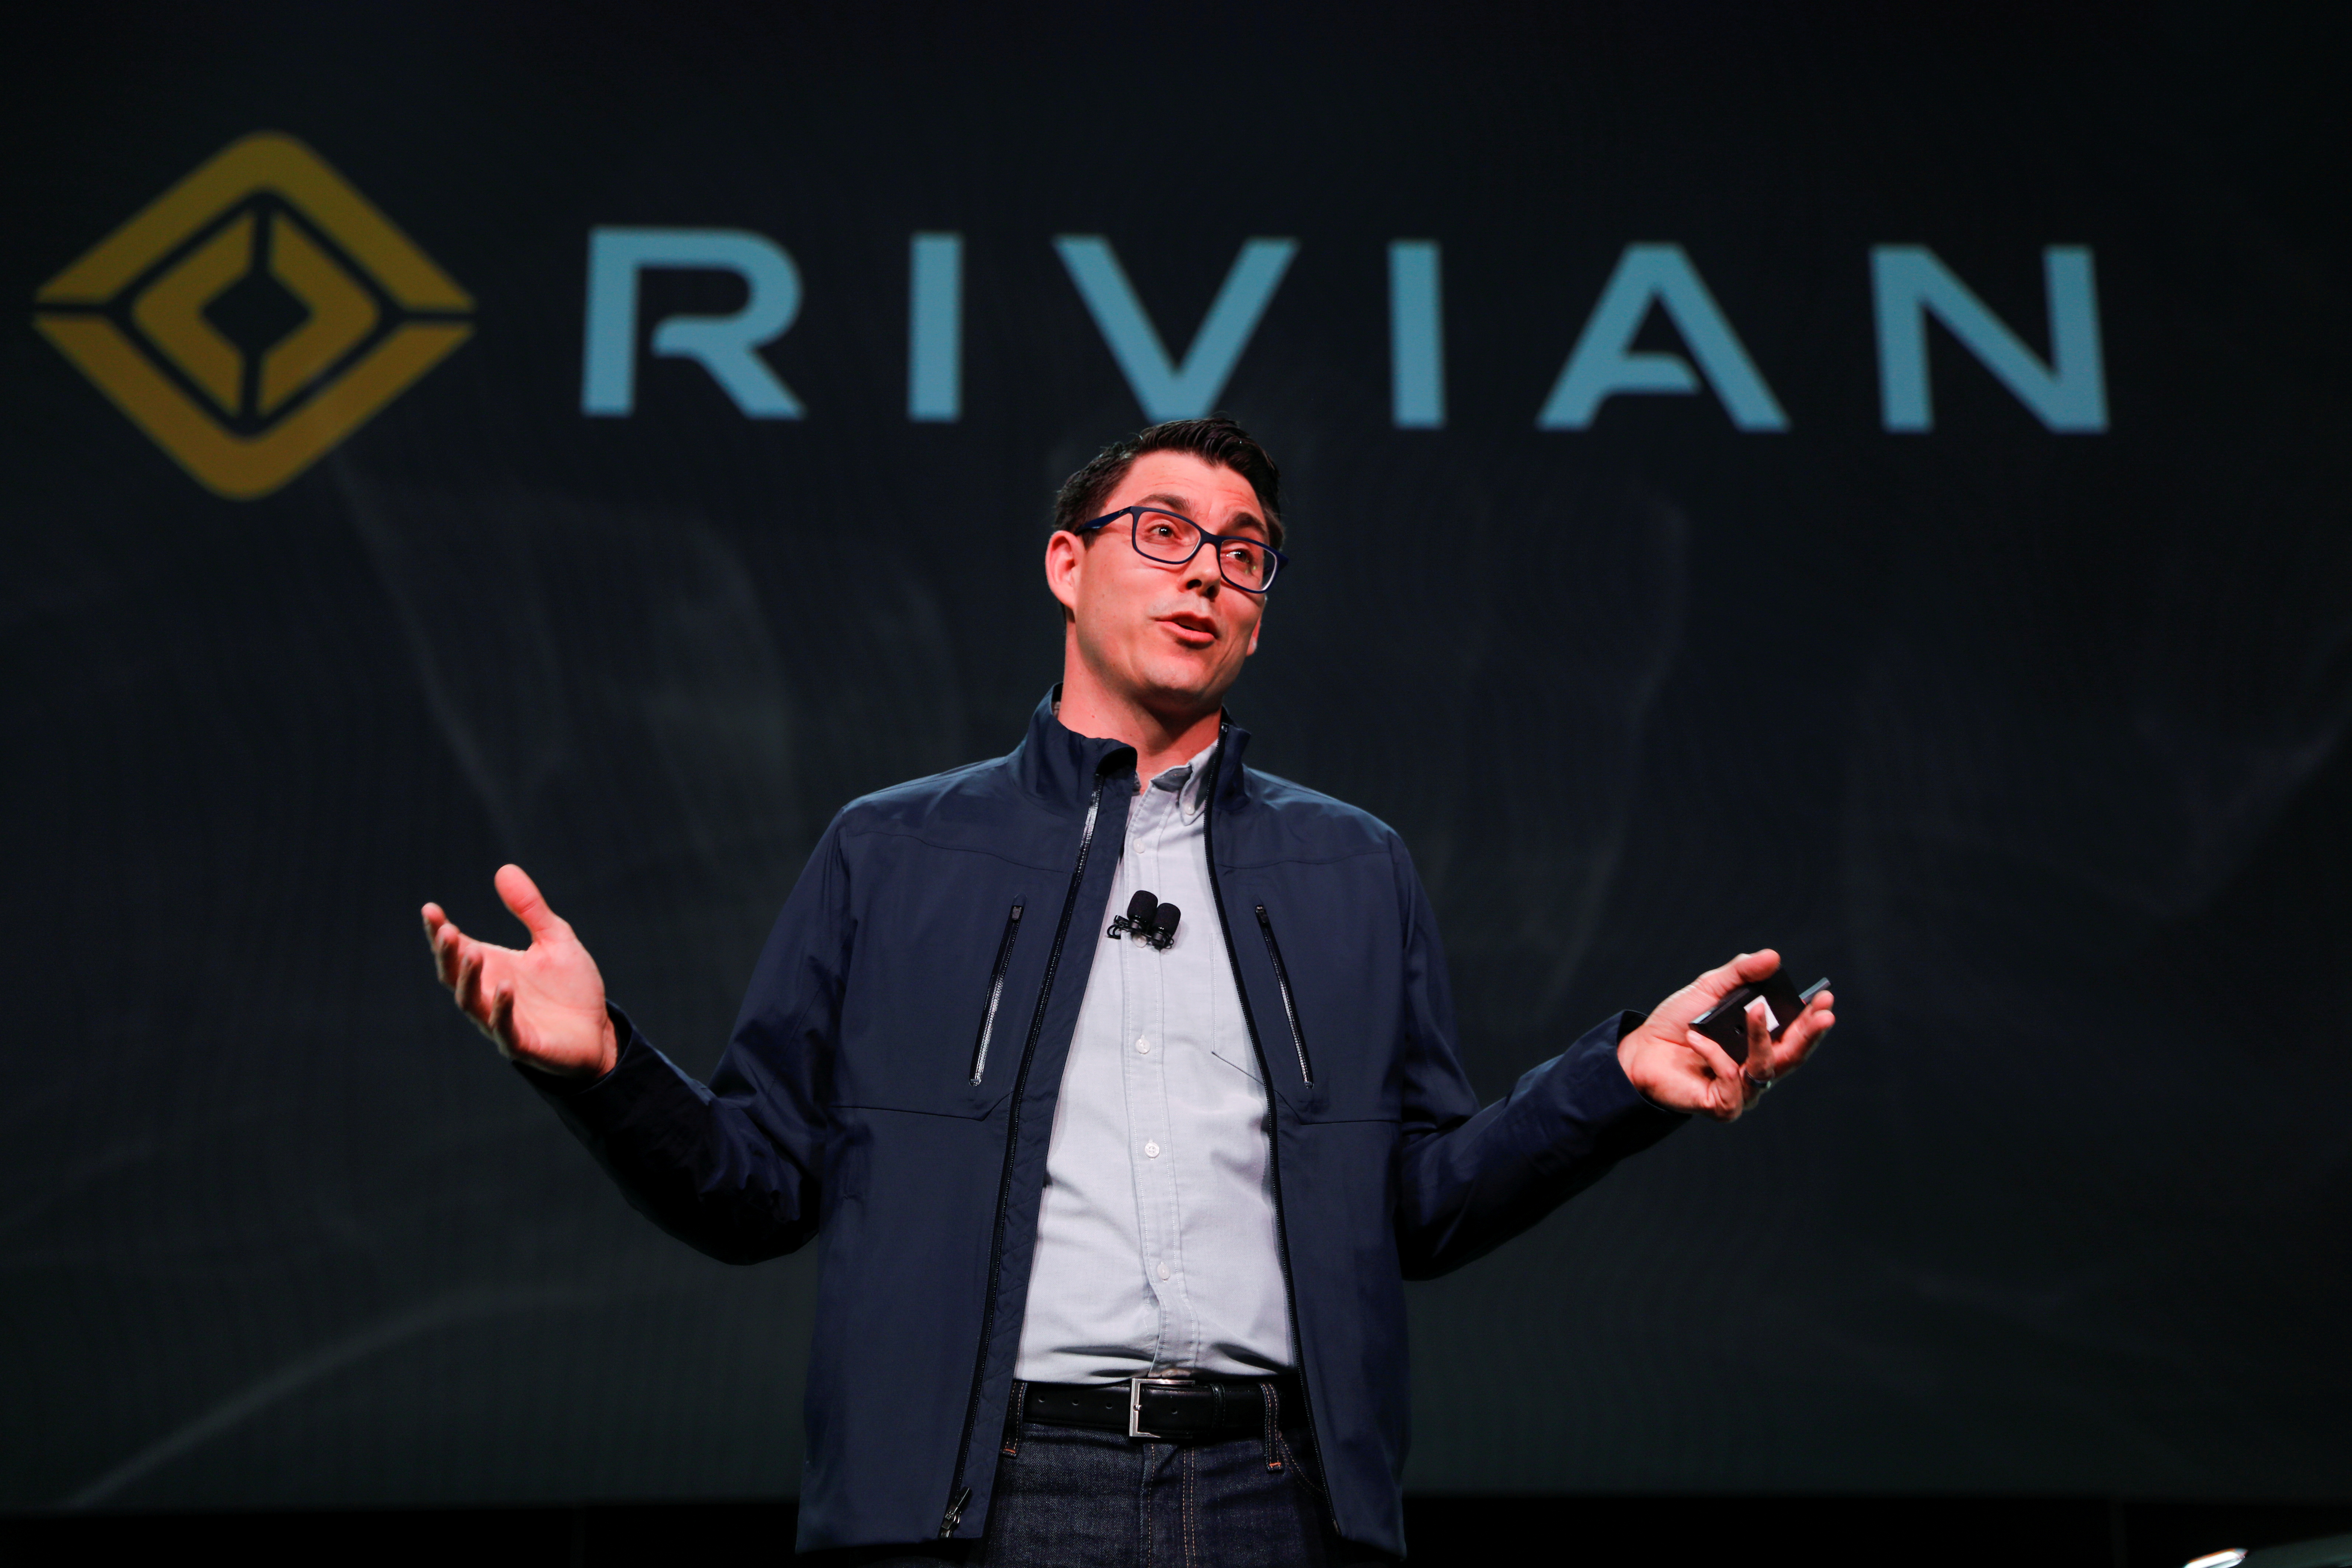 Rivian introduces all-electric pickup and SUV at LA Auto Show in Los Angeles